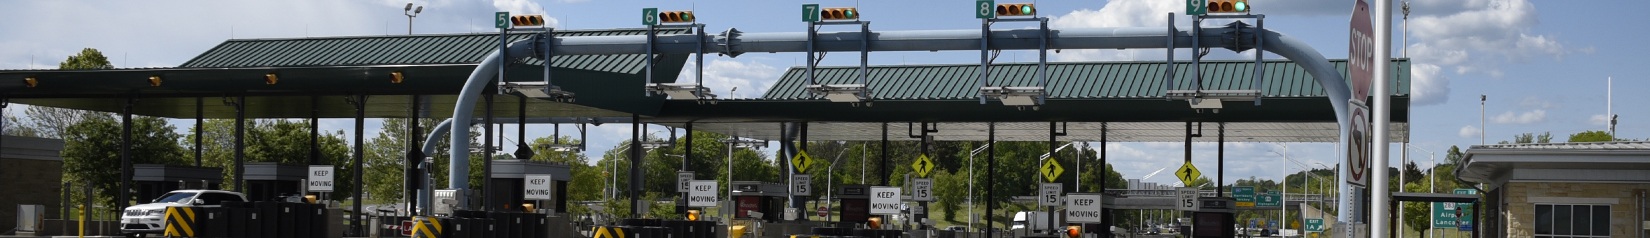 Banner image that shows a row of Pennsylvania Turnpike E-ZPass and cash toll booths